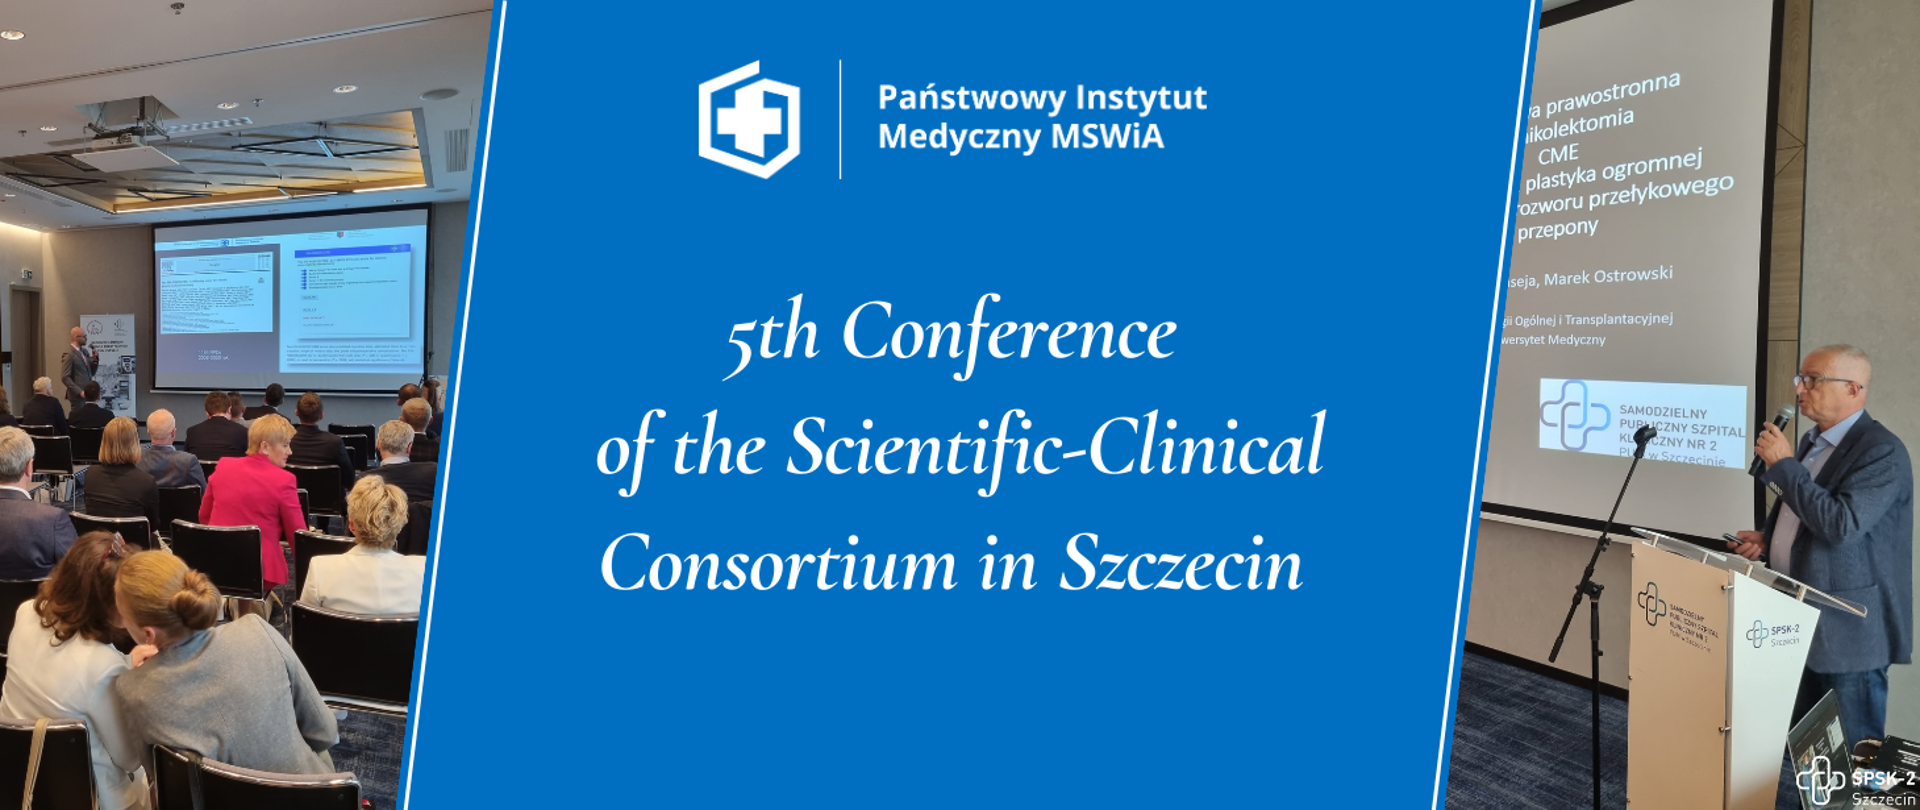 5th Conference of the Scientific-Clinical Consortium in Szczecin 